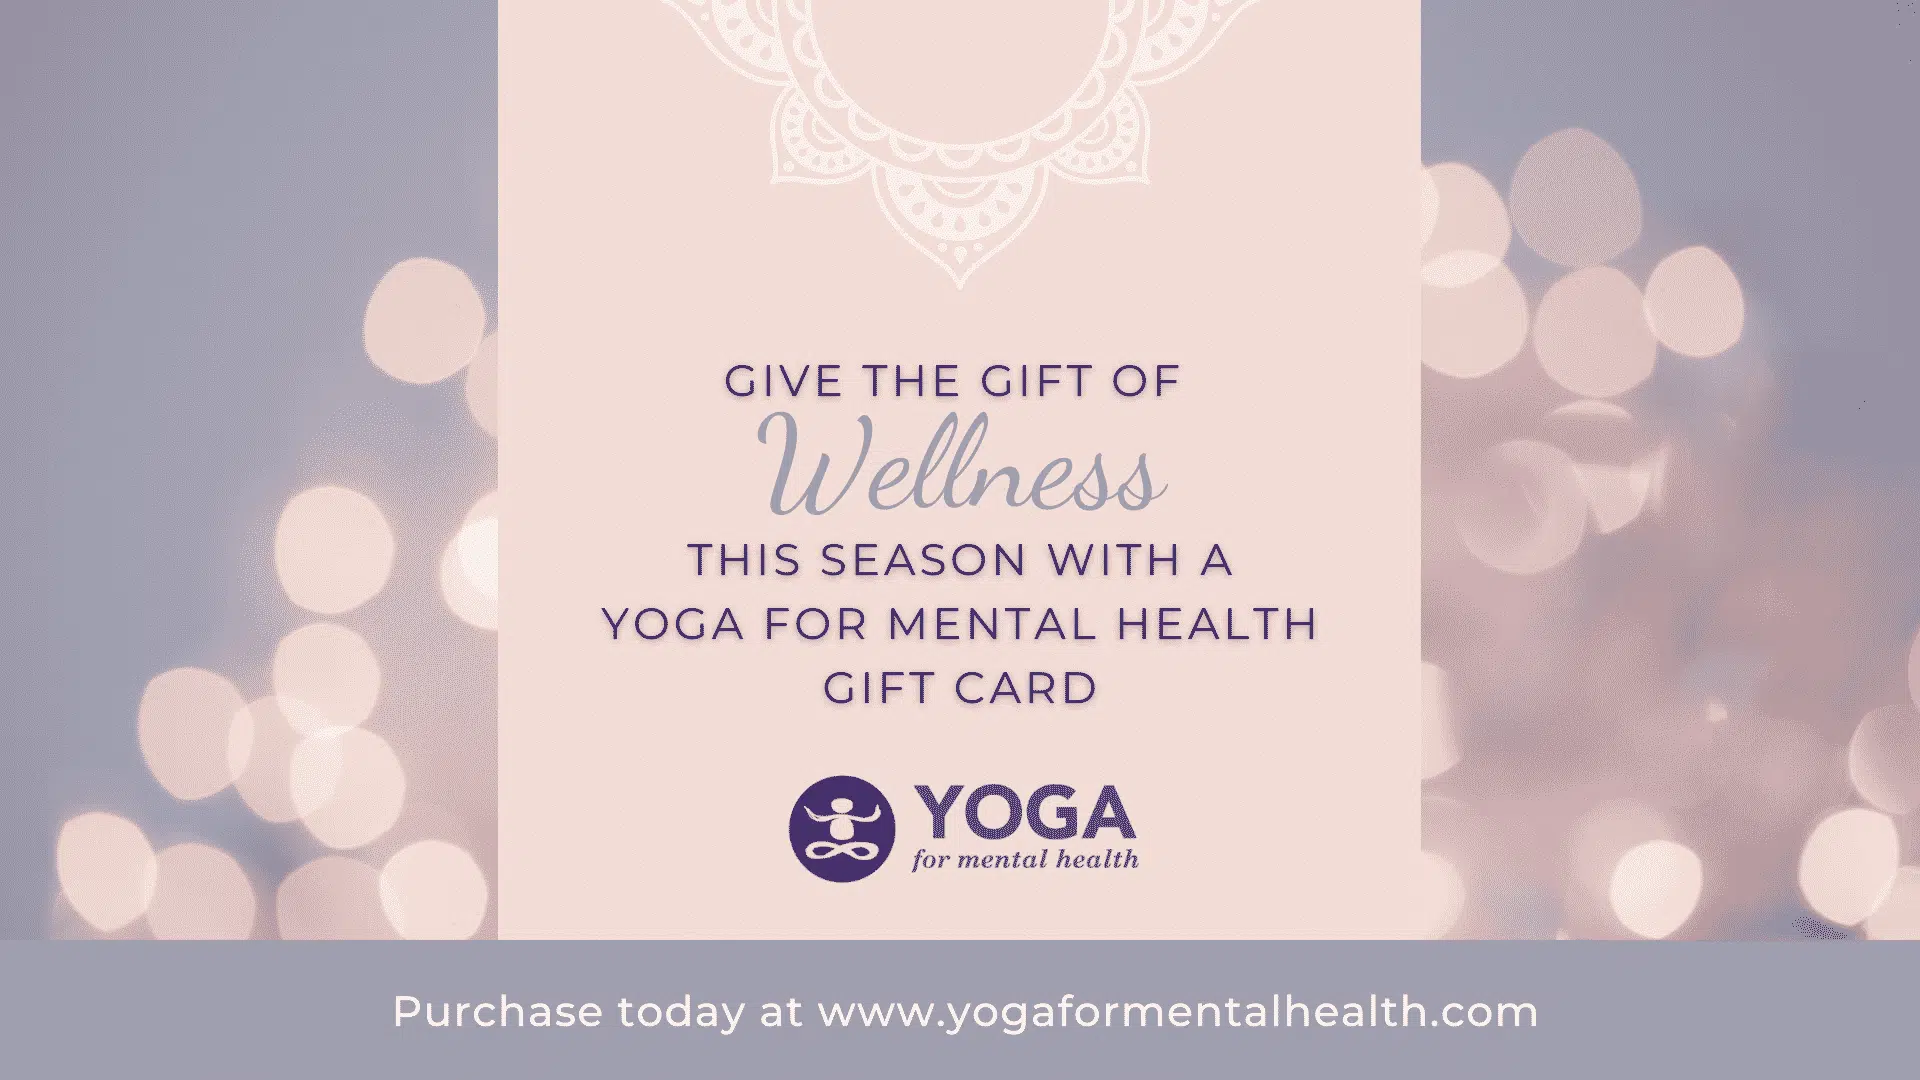 Yoga for Mental Health Gift Cards Now Available! - Yoga for Mental